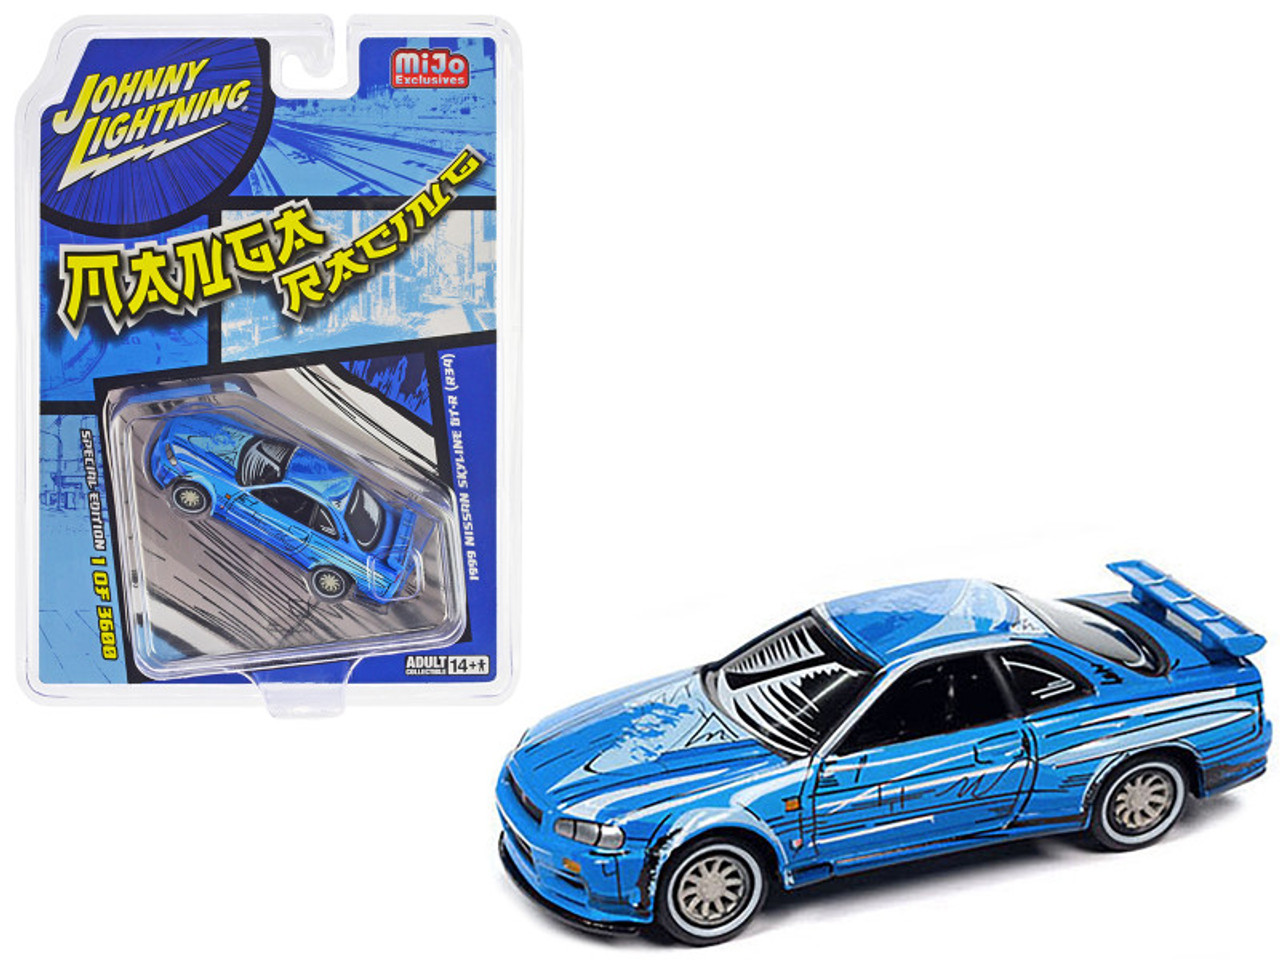 1999 Nissan Skyline GT-R (R34) RHD (Right Hand Drive) Blue with Graphics "Manga Racing" Limited Edition to 3600 pieces Worldwide 1/64 Diecast Model Car by Johnny Lightning